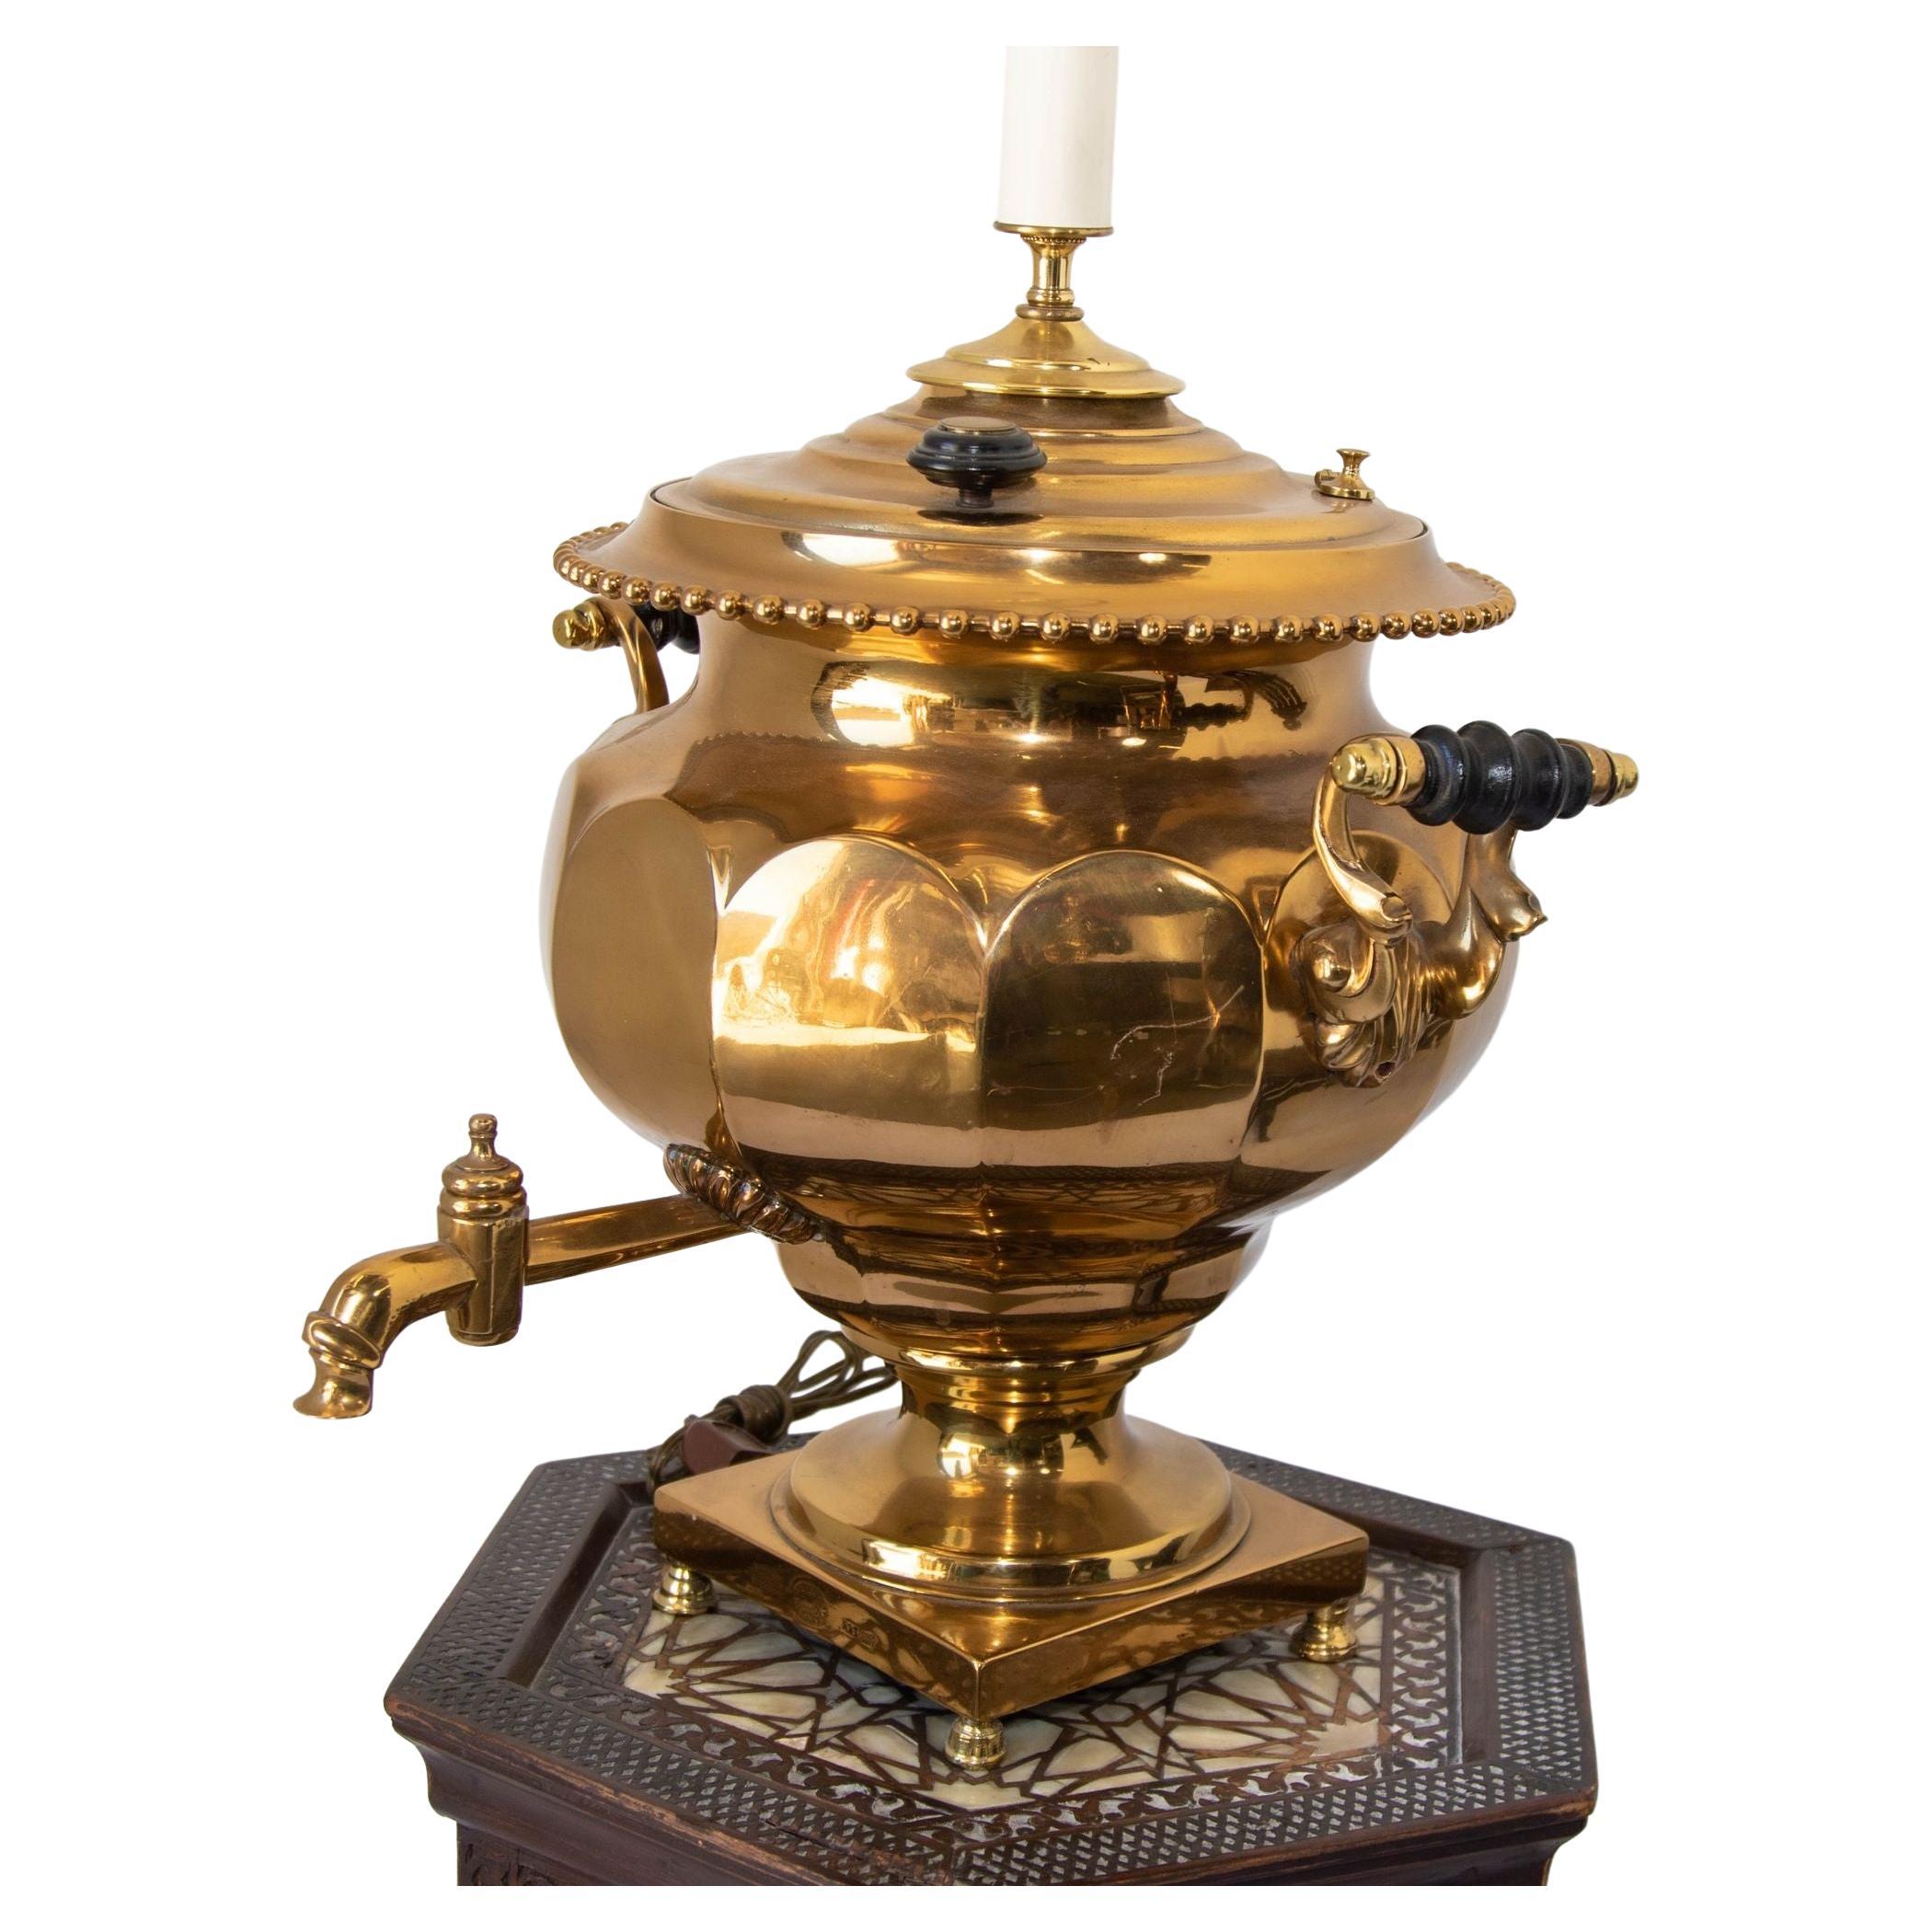 What is a samovar and how does it work?